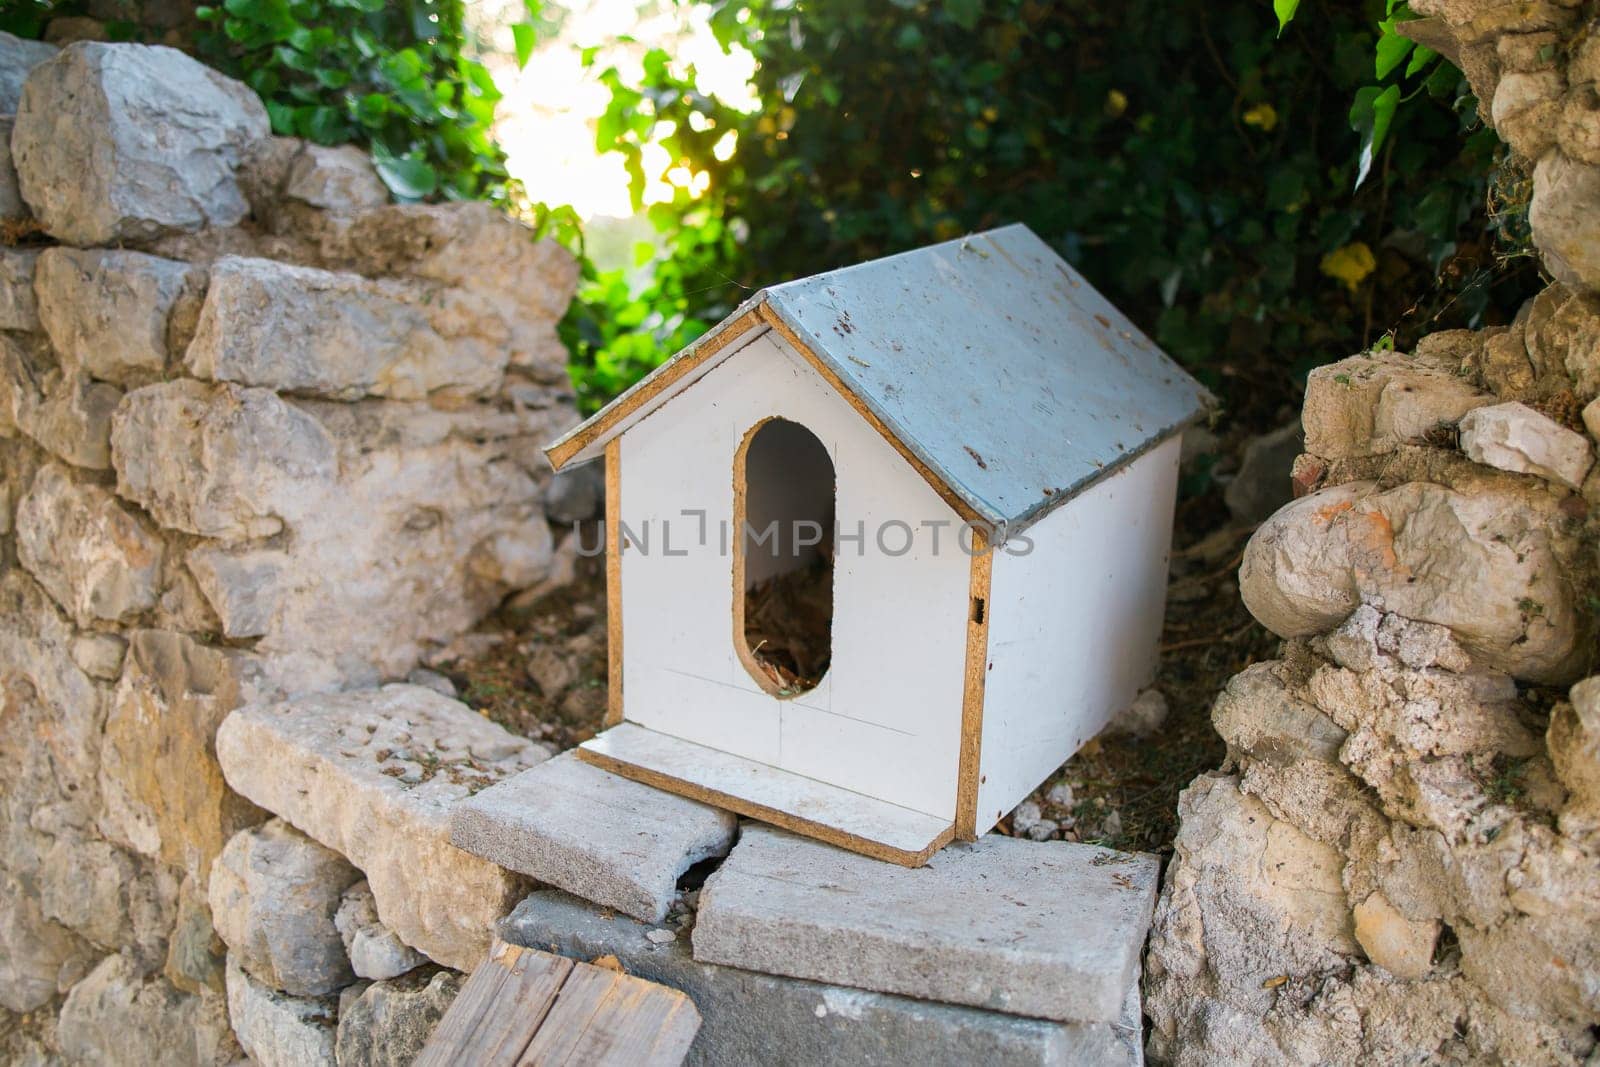 Hand made house for homeless cats stands in the park among the trees